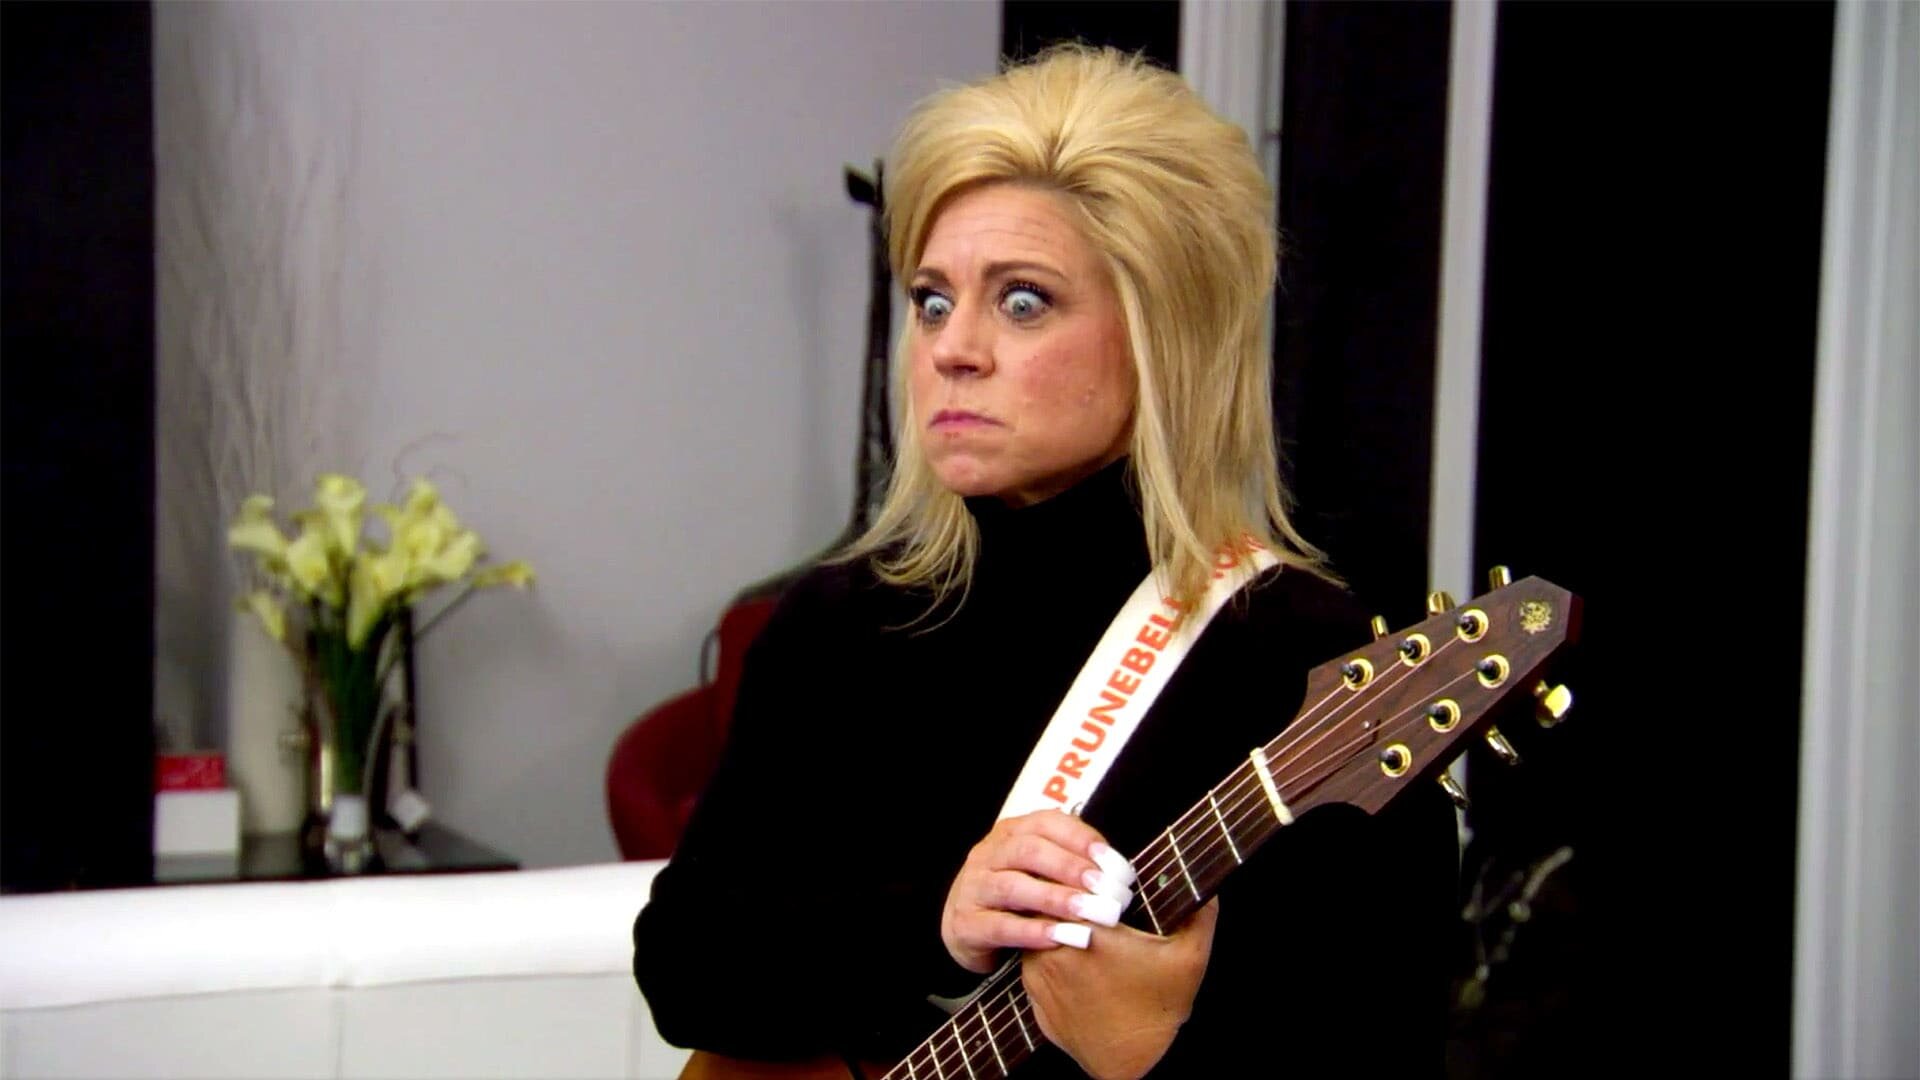 Long Island Medium S8E4 Getting the Band Back Together